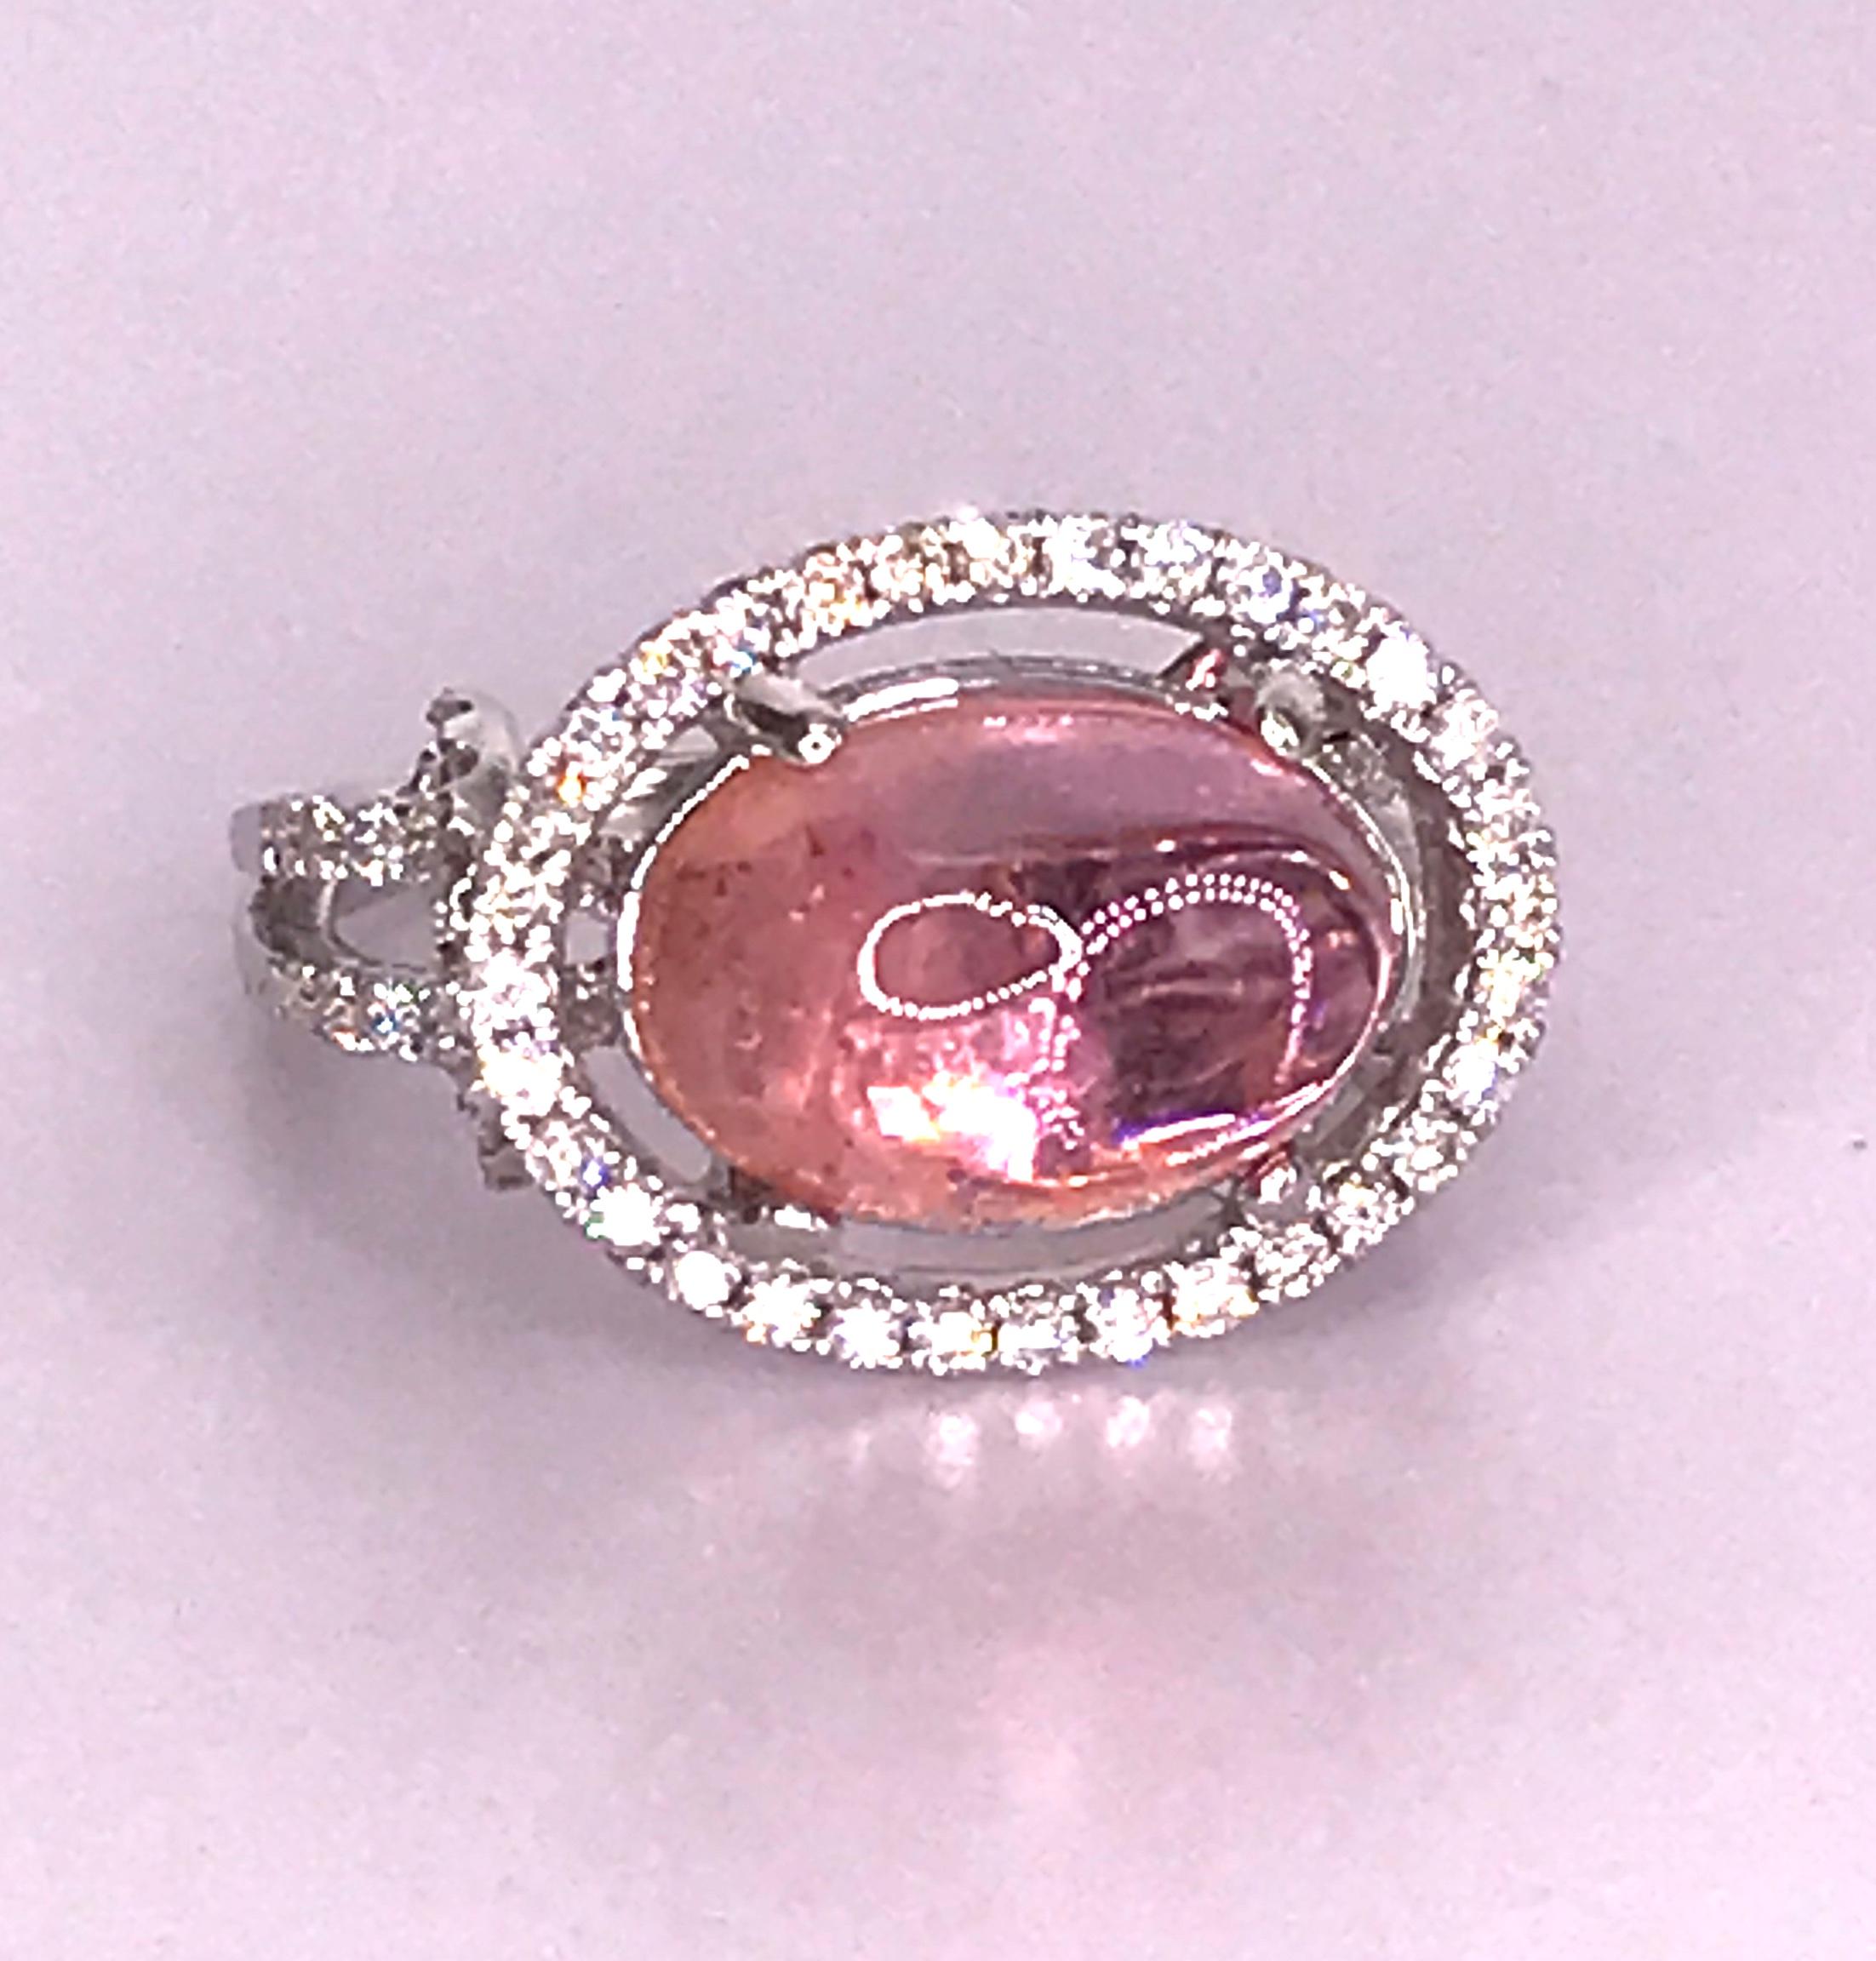 Women's 5.9 Carat Pink Tourmaline Cabochon and Diamond Ring For Sale